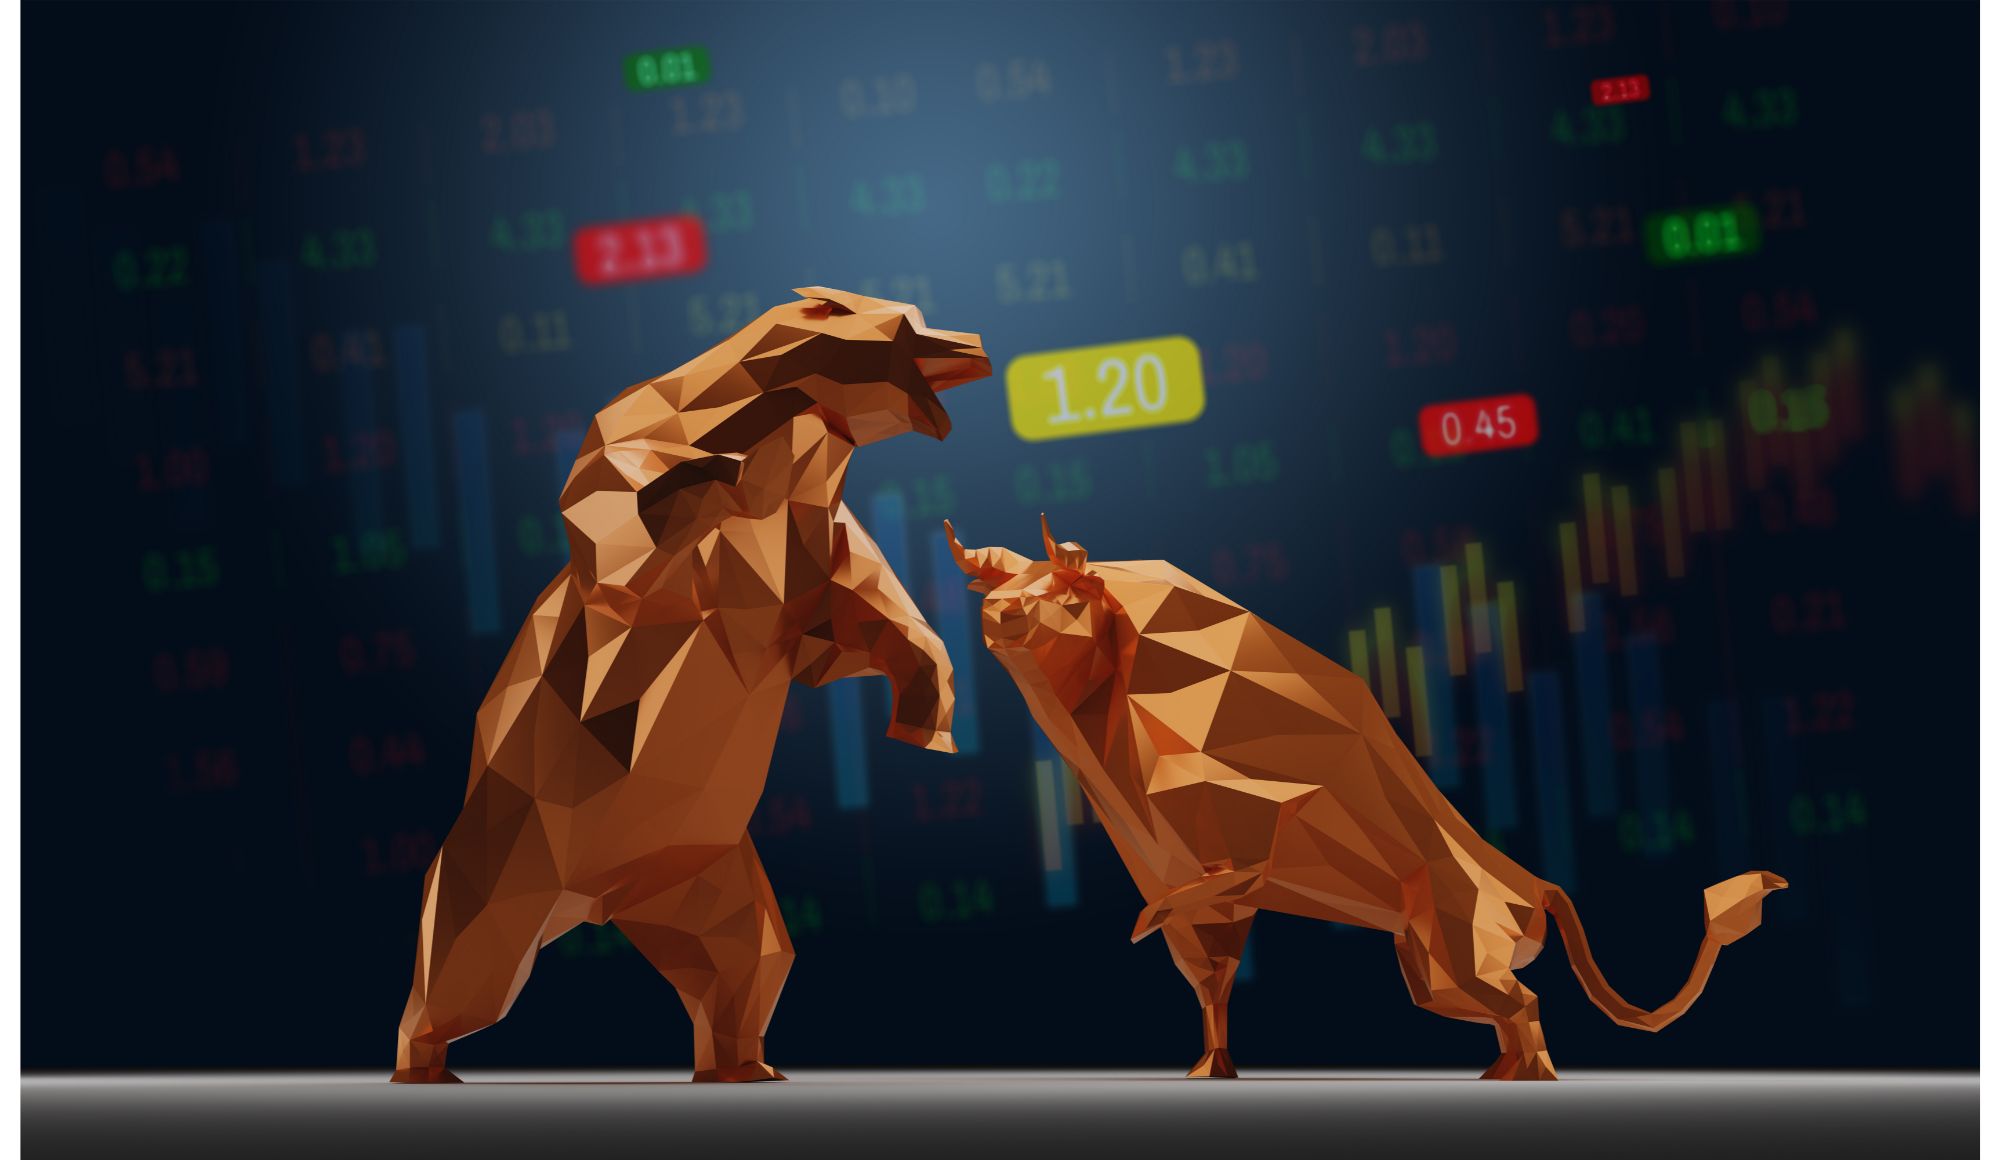 Market Commentary: S&P 500 4,200 Next?